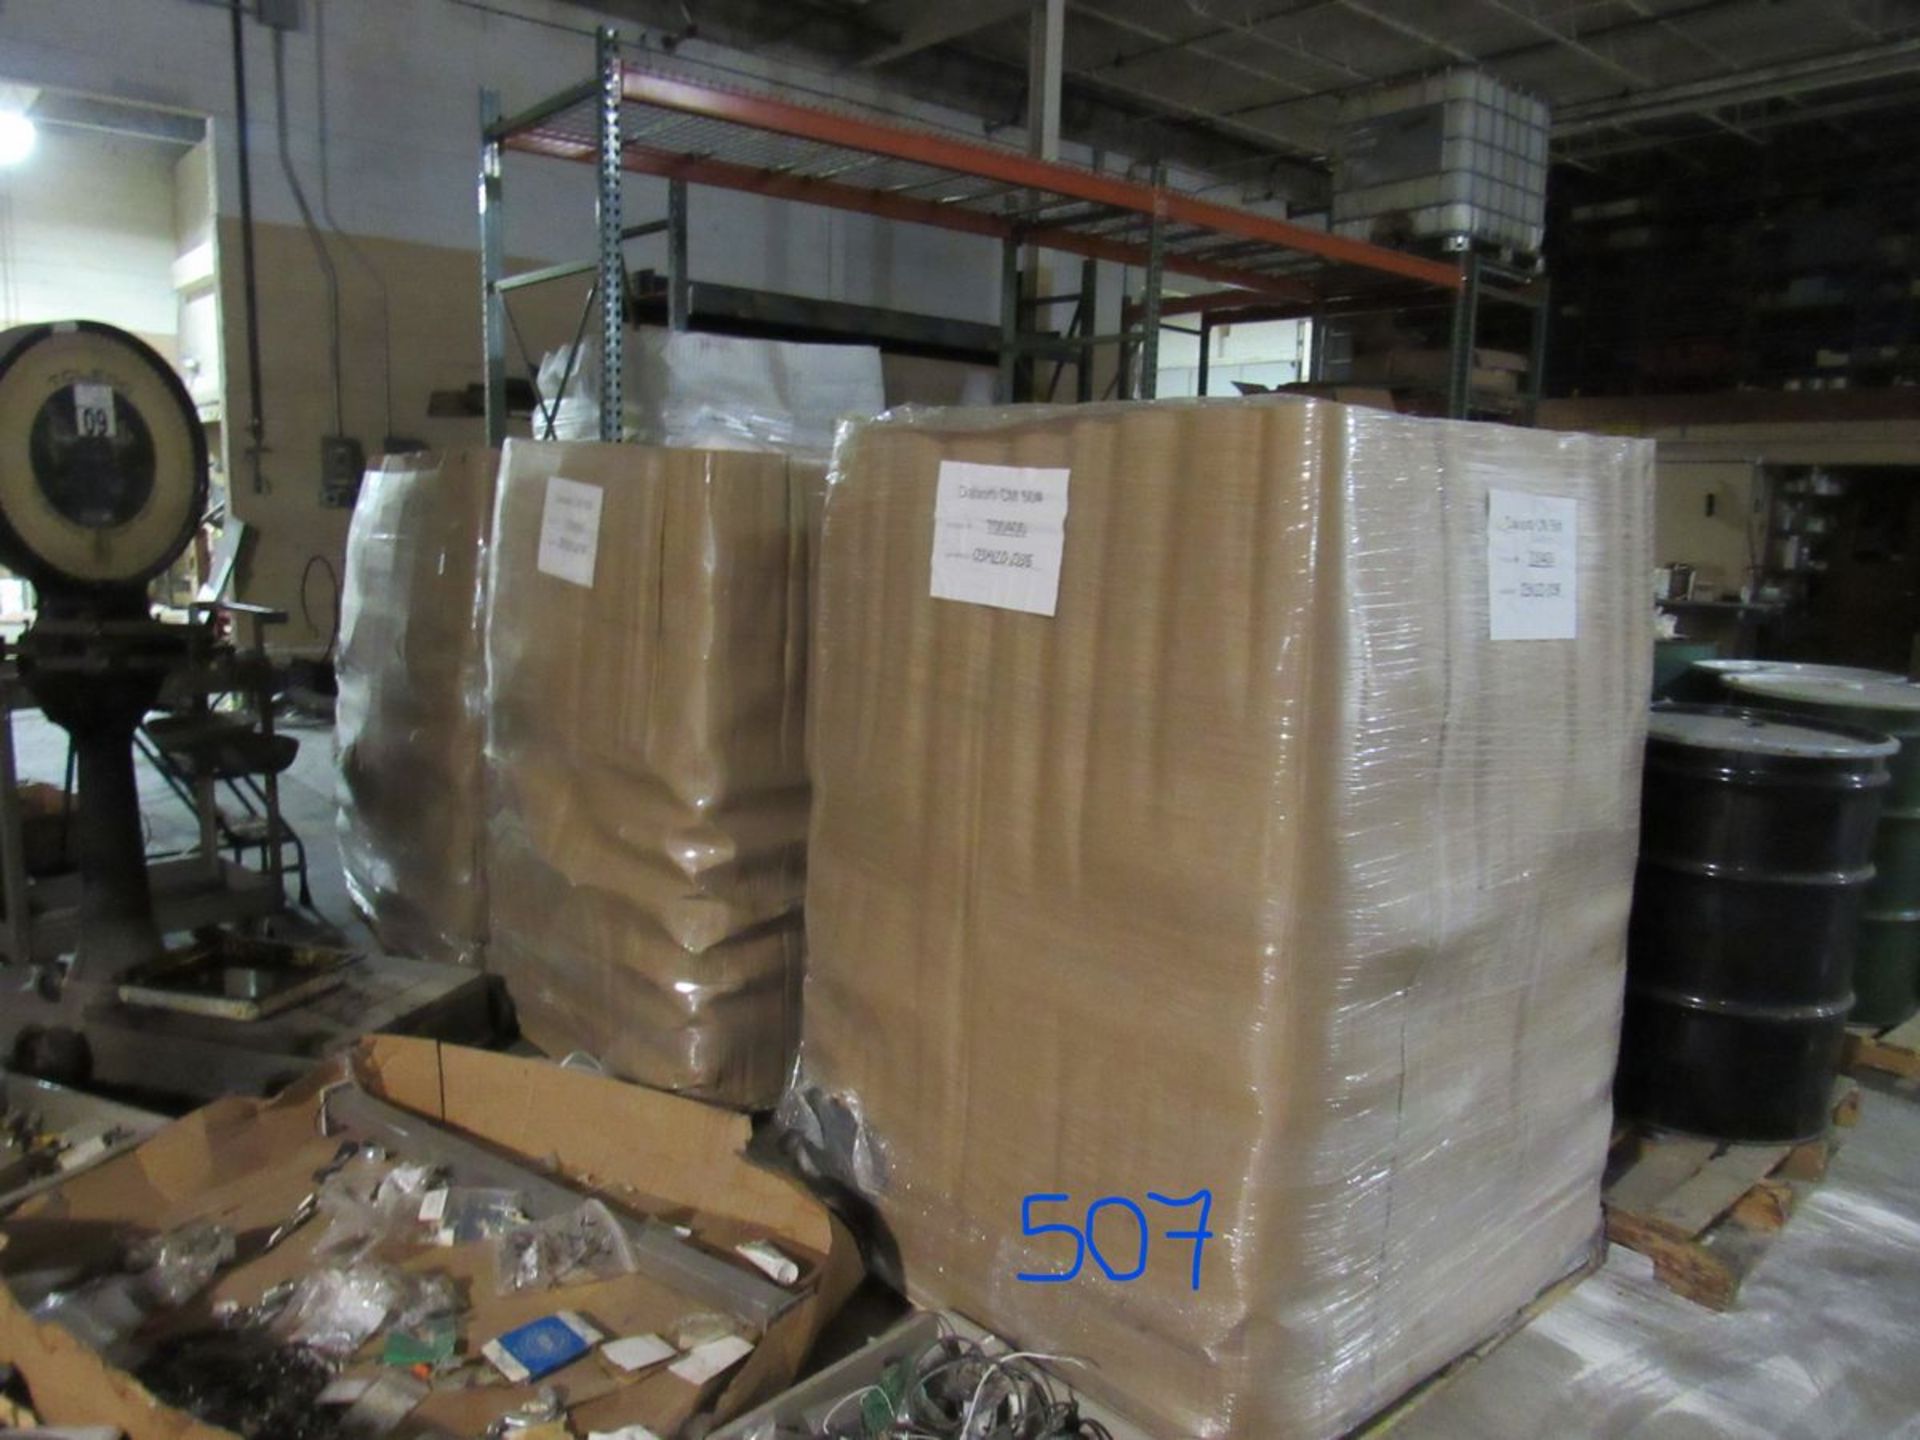 One Pallet of DALSORB Oil Purifier -filters burnt frying oil - 1000 pounds (Rigging and loading fees